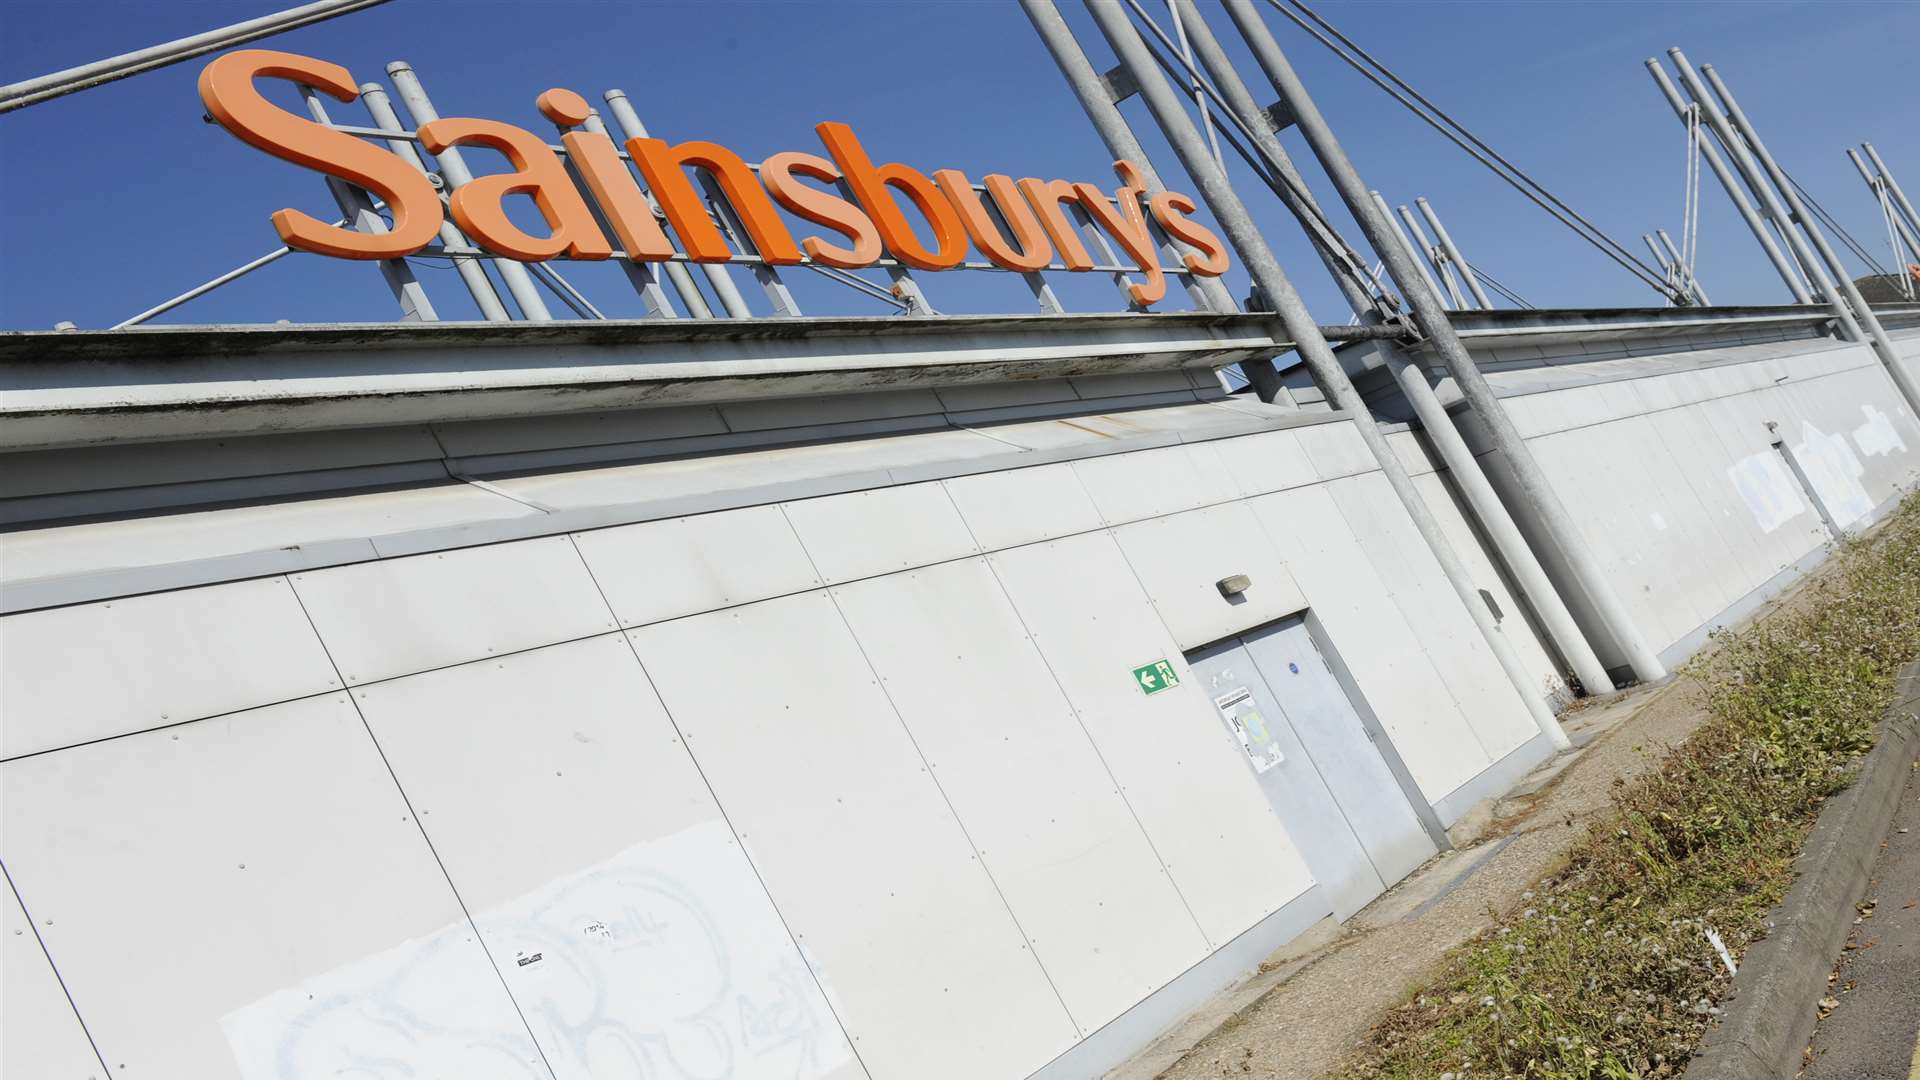 Moore targeted the Sainsbury's store in Canterbury